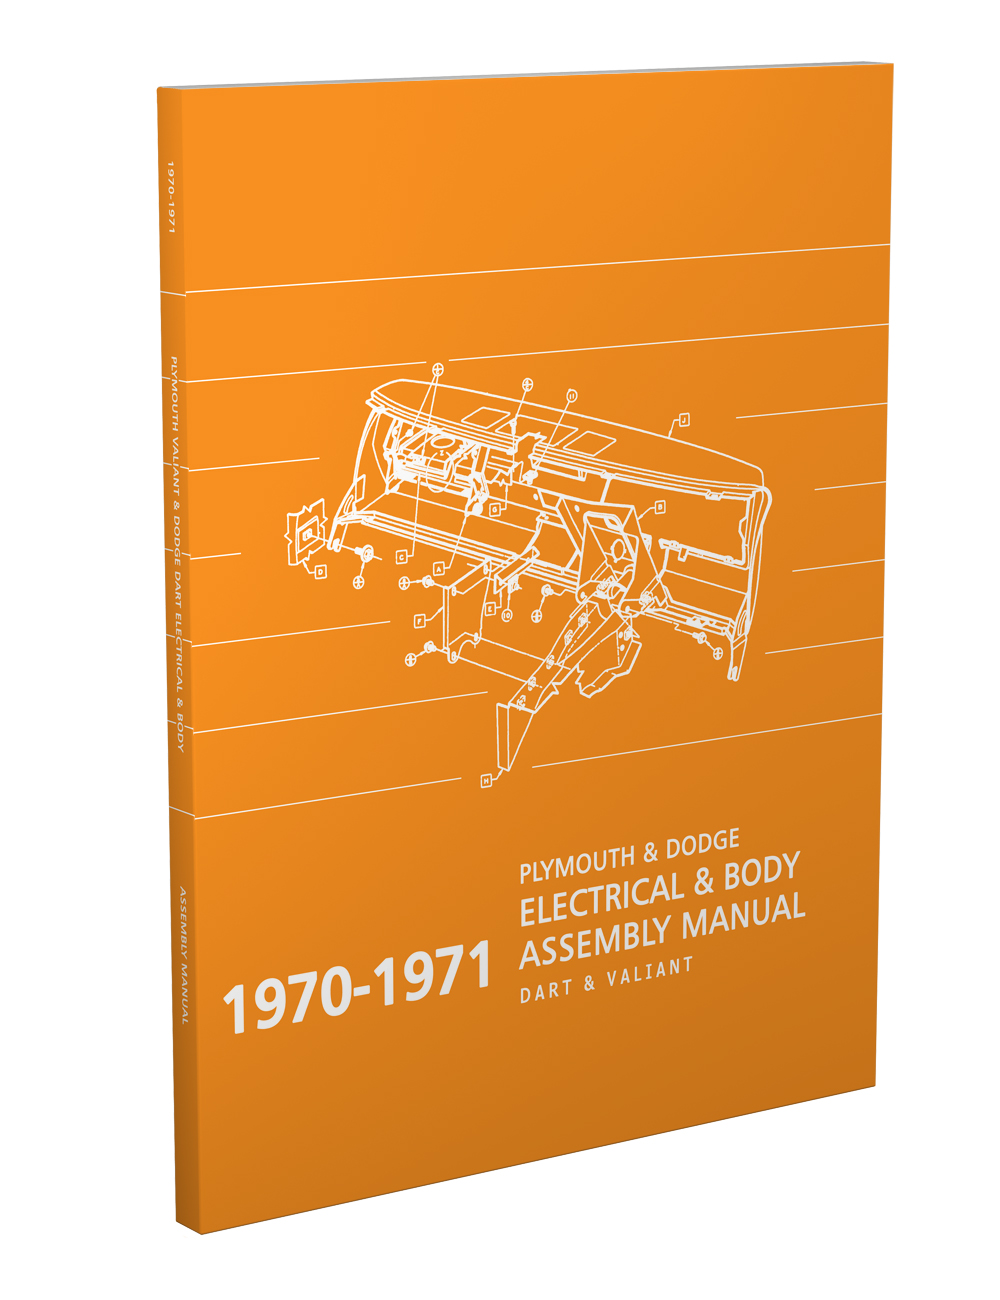 1970-1971 Dart and Valiant Electrical and Body Assembly Manual Reprint